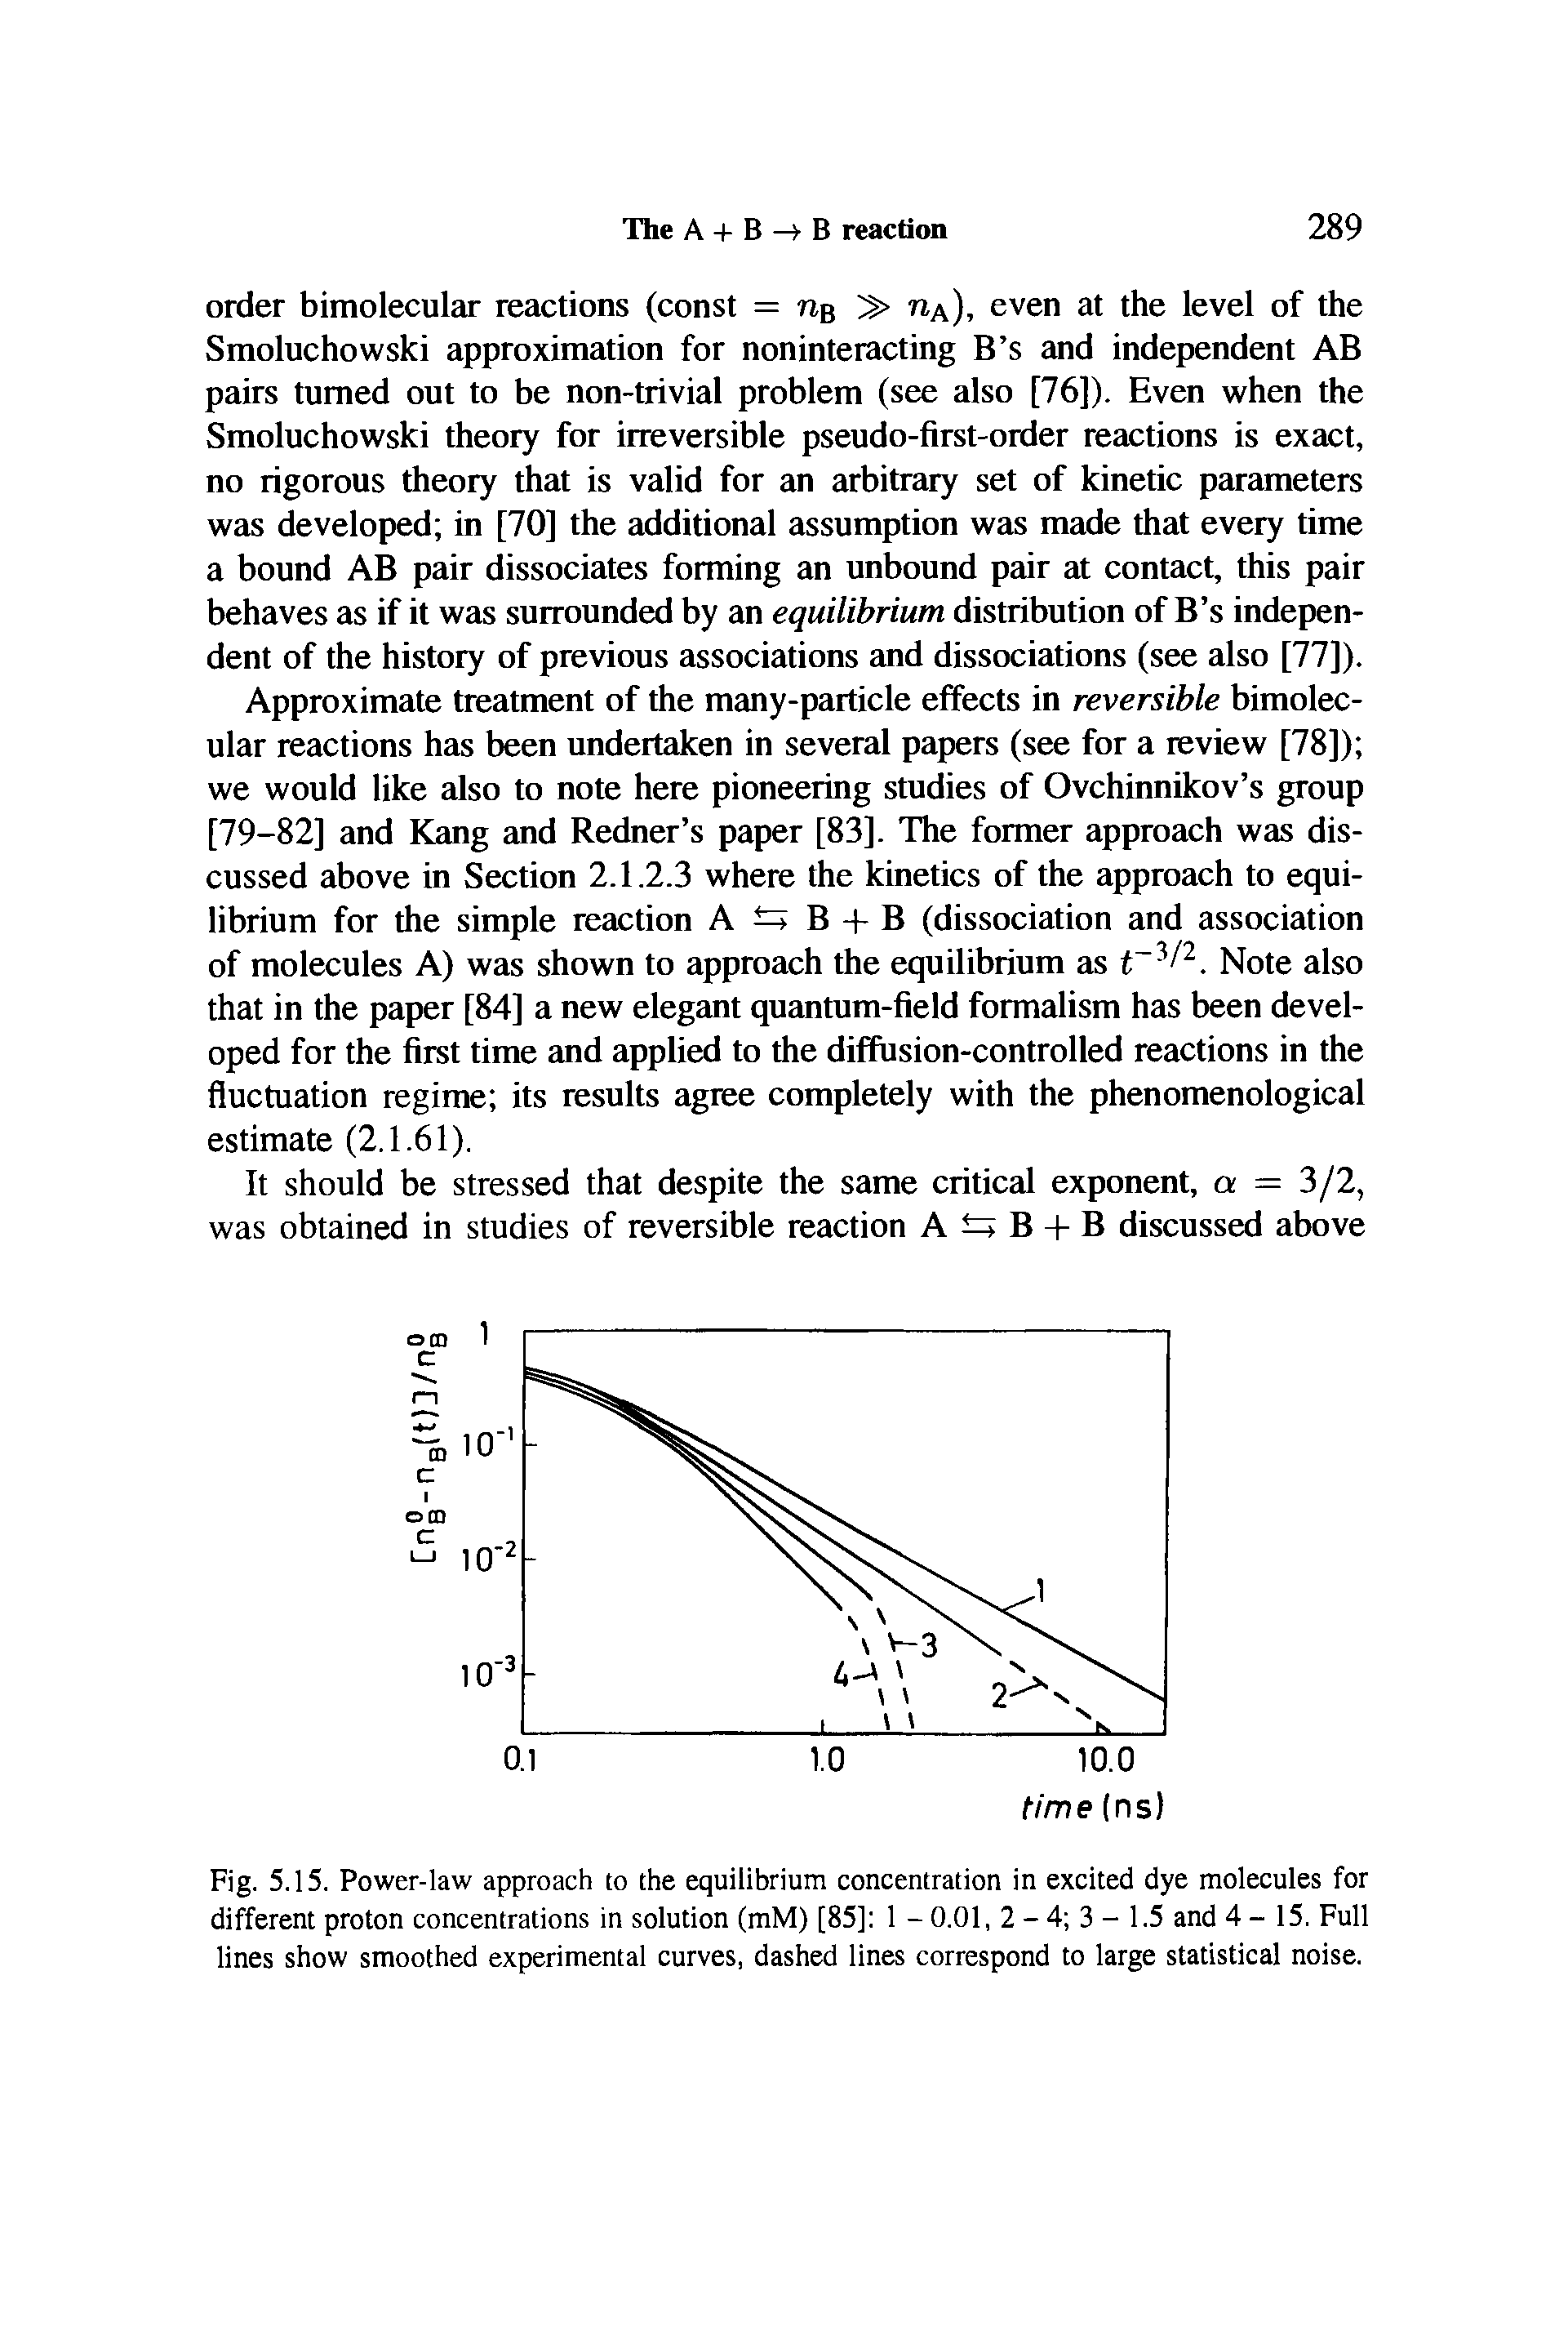 Fig. 5.15. Power-law approach to the equilibrium concentration in excited dye molecules for different proton concentrations in solution (mM) [85] 1 - 0.01, 2 - 4 3 - 1.5 and 4 - 15. Full lines show smoothed experimental curves, dashed lines correspond to large statistical noise.